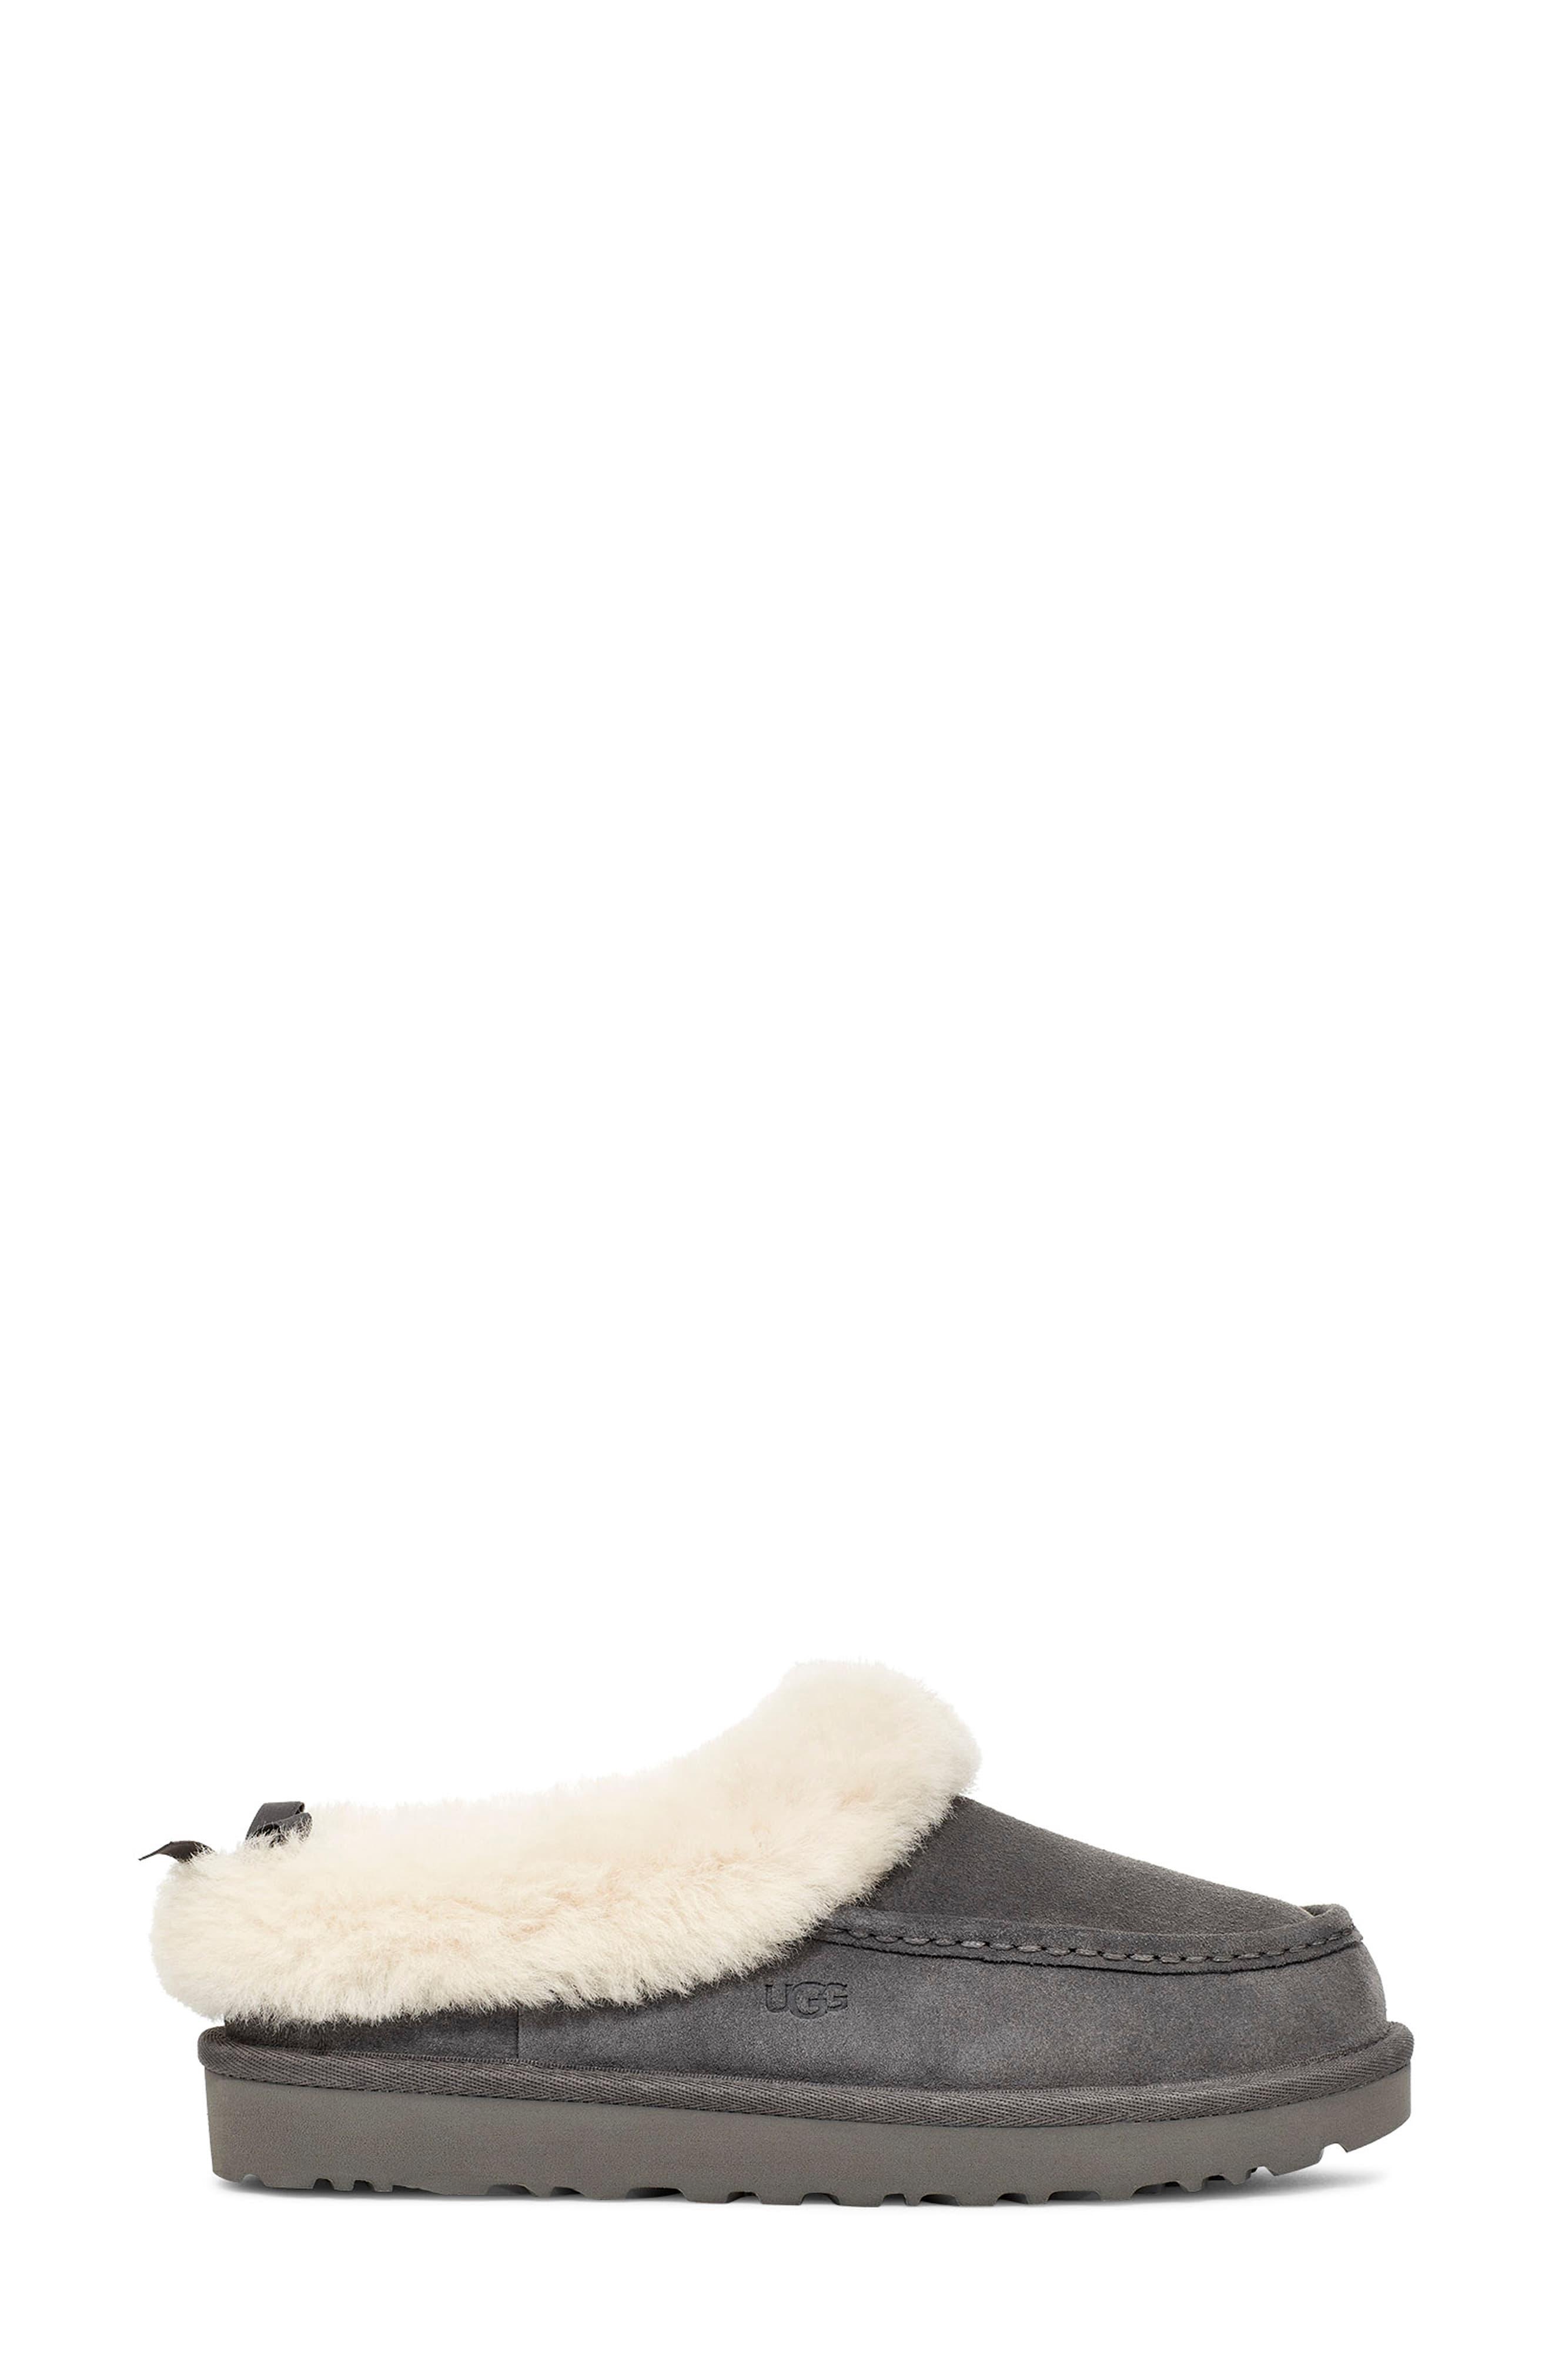 ugg grove moccasin slippers